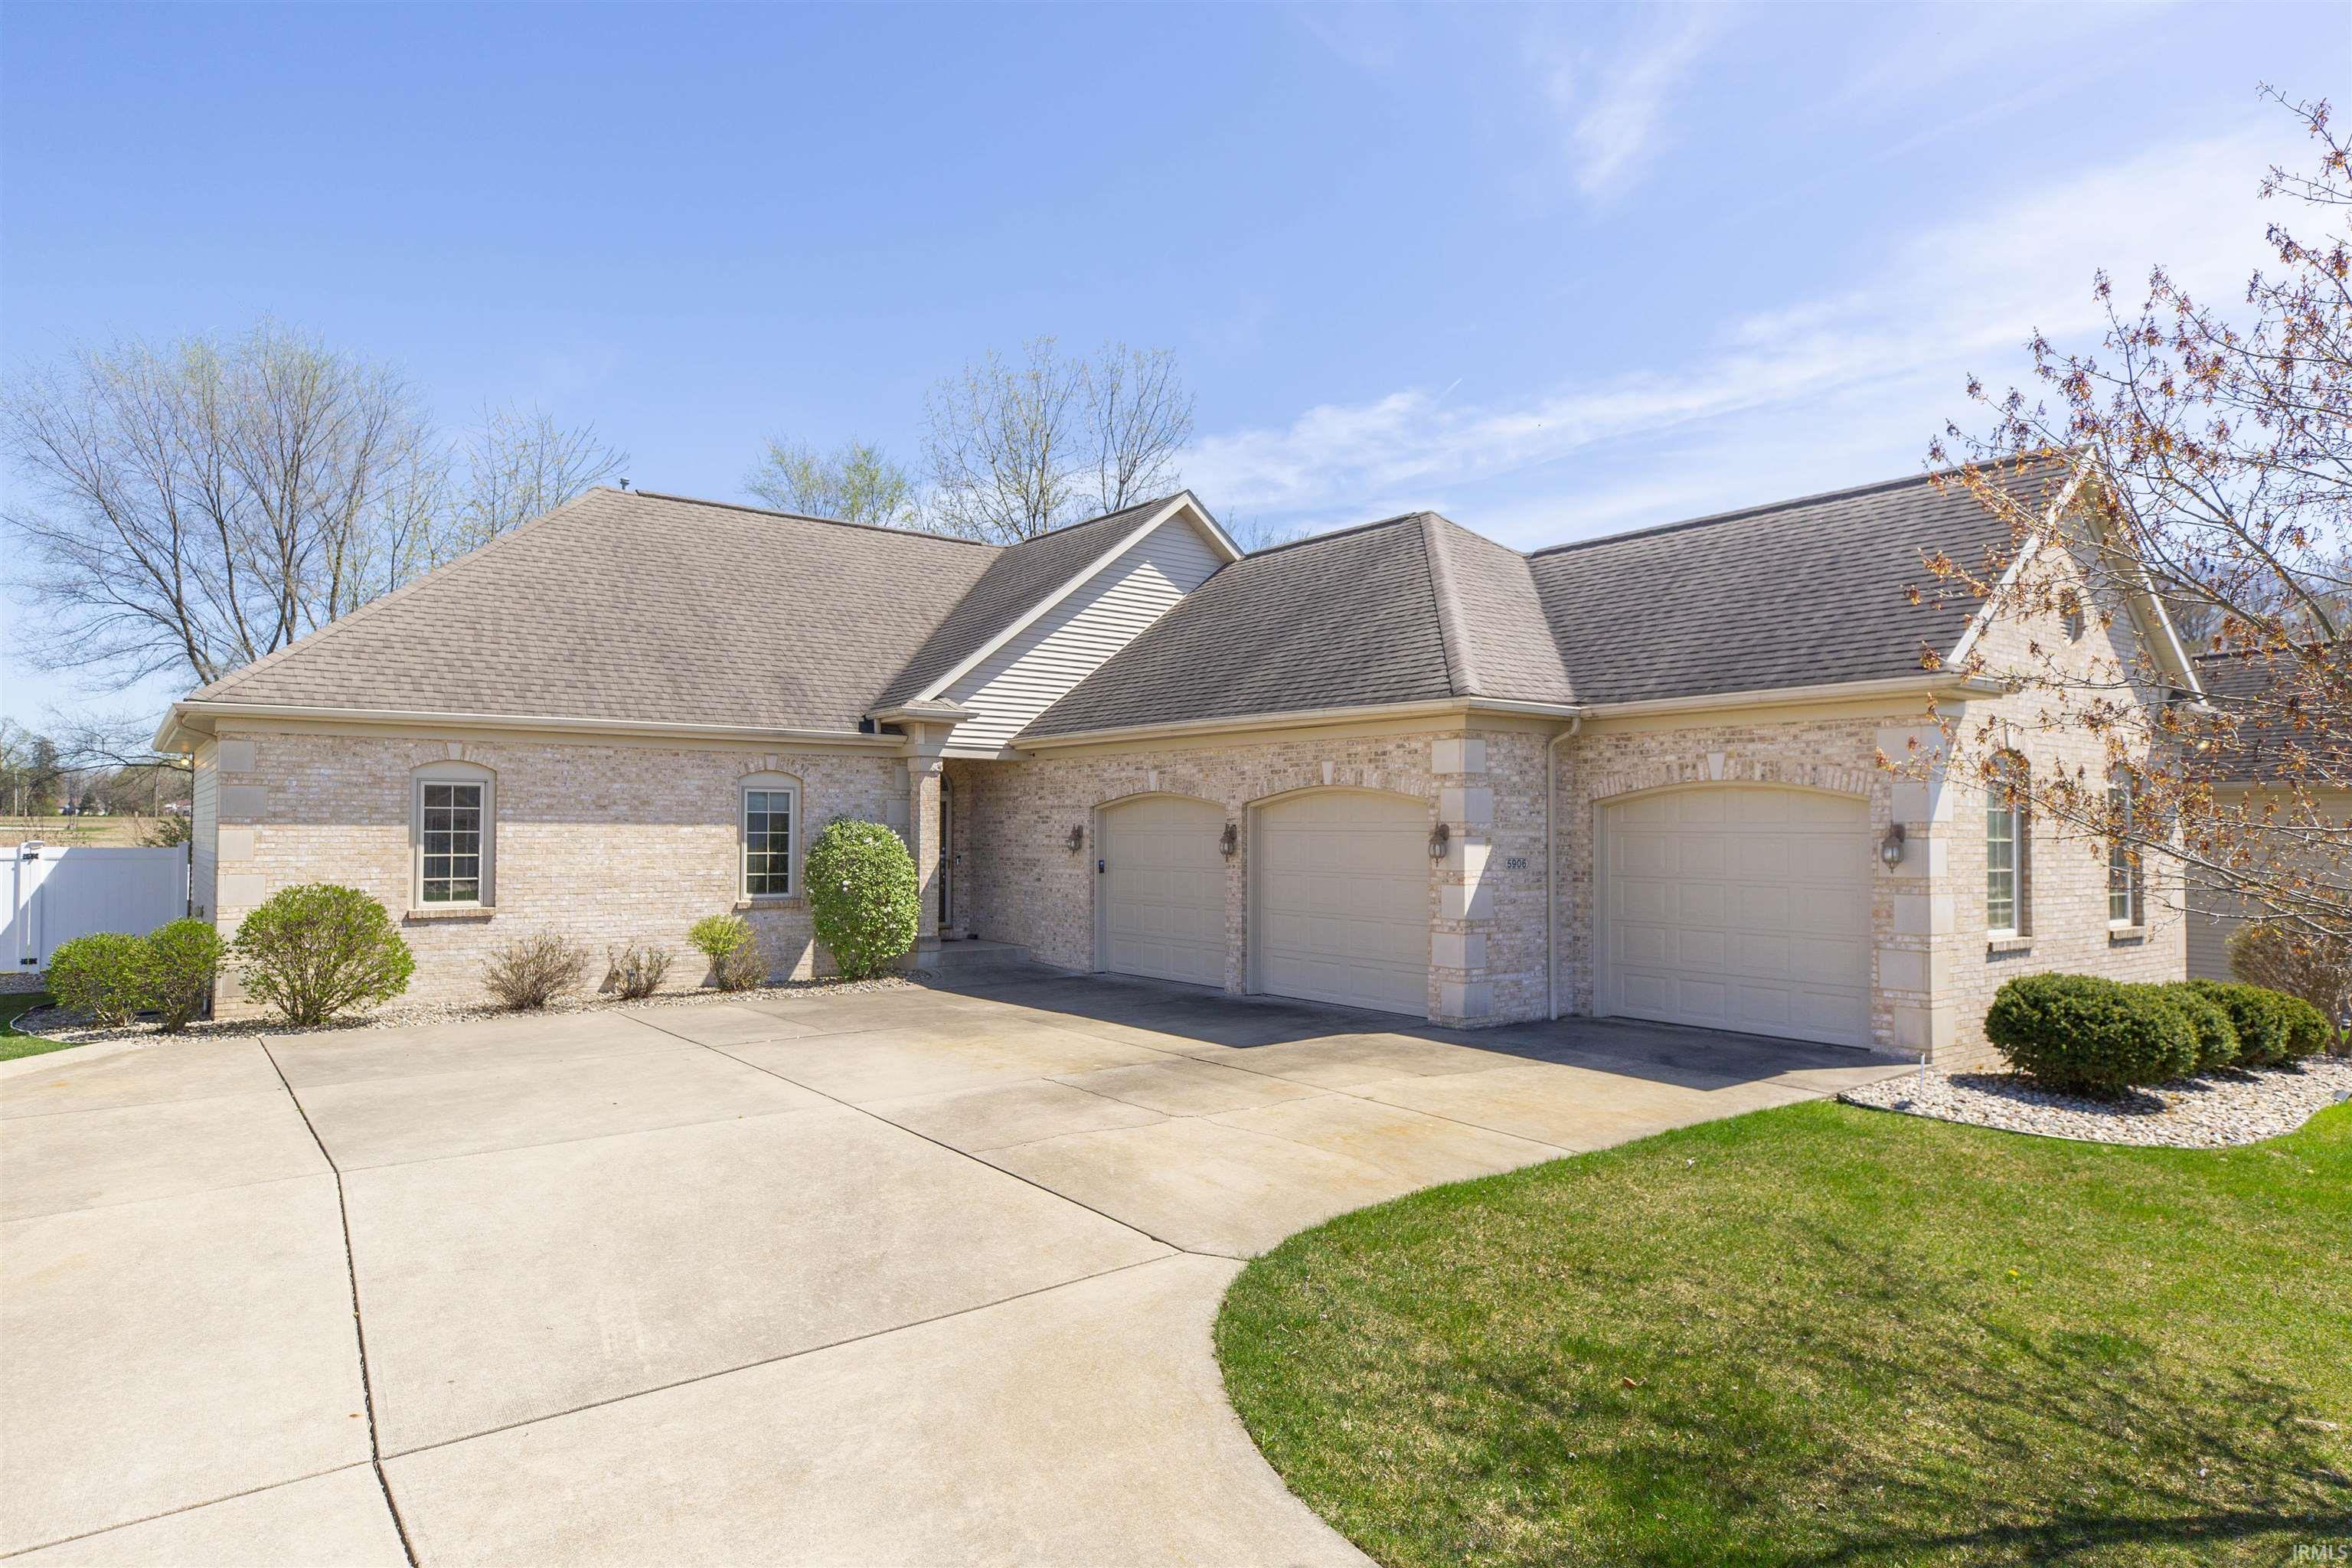 5906 E Boxwood Drive, South Bend, IN 